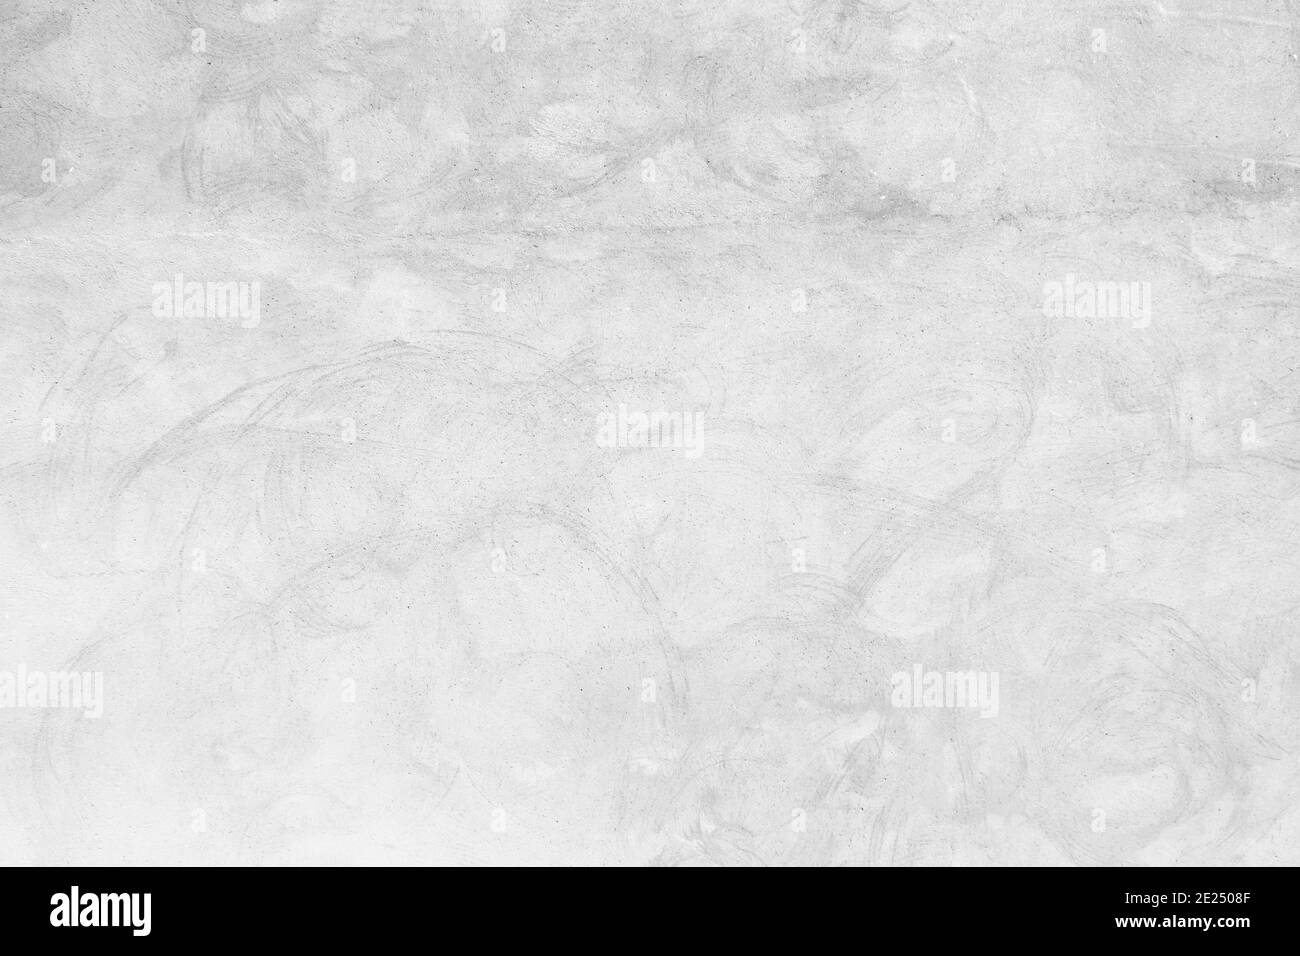 Light grey concrete wall background or texture Stock Photo - Alamy